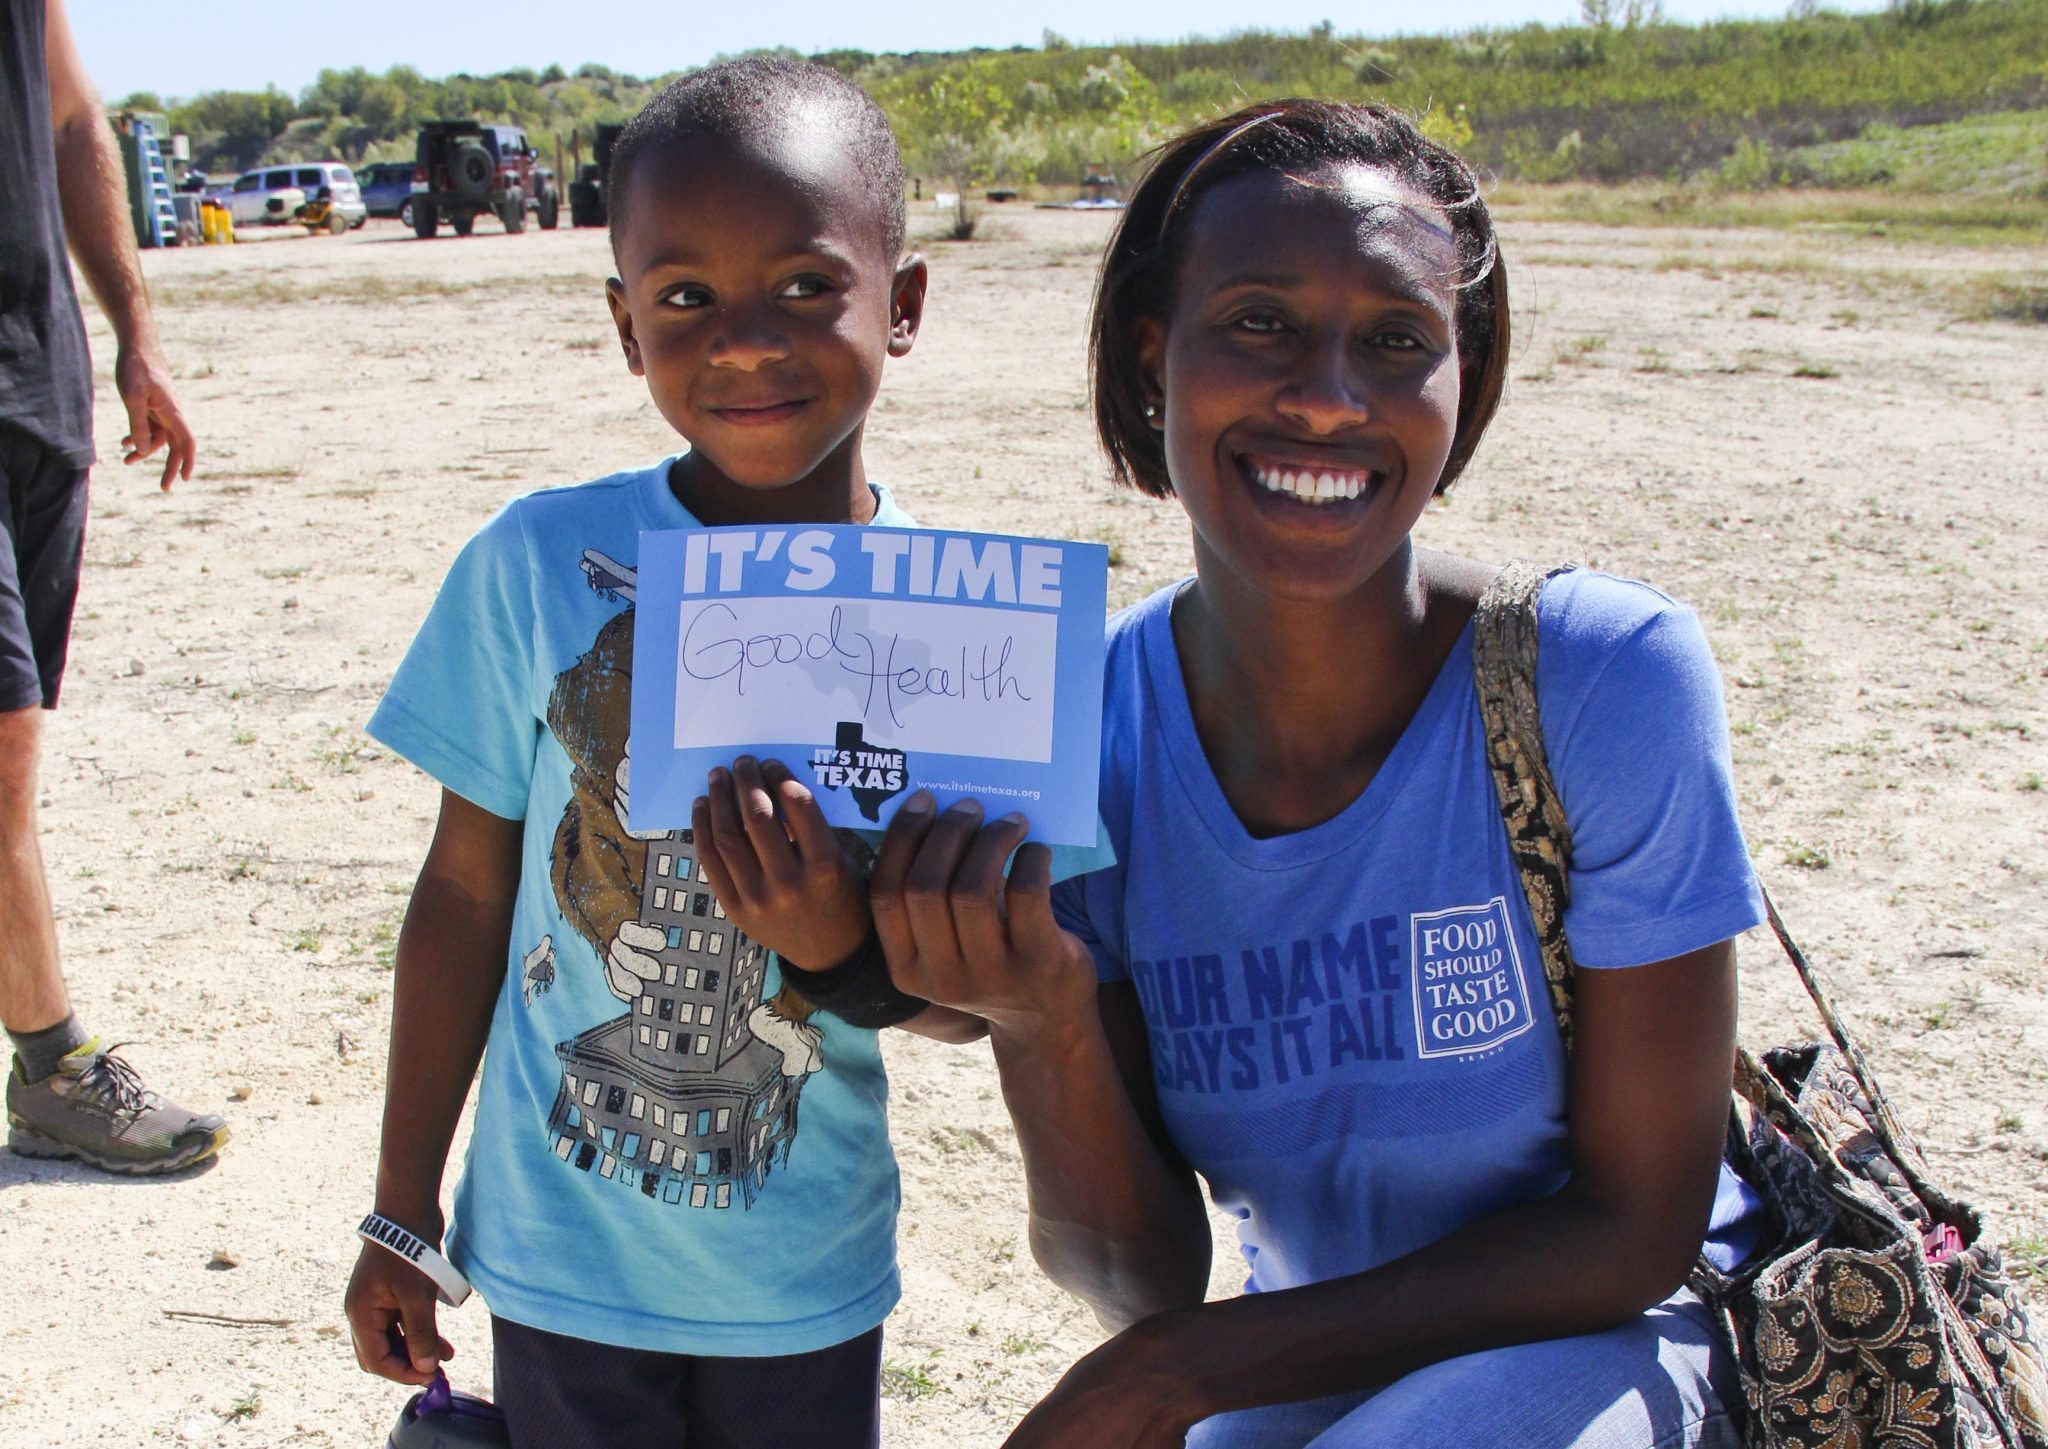 A woman and her child posing for a photo holding a sign that says "It's Time Texas."